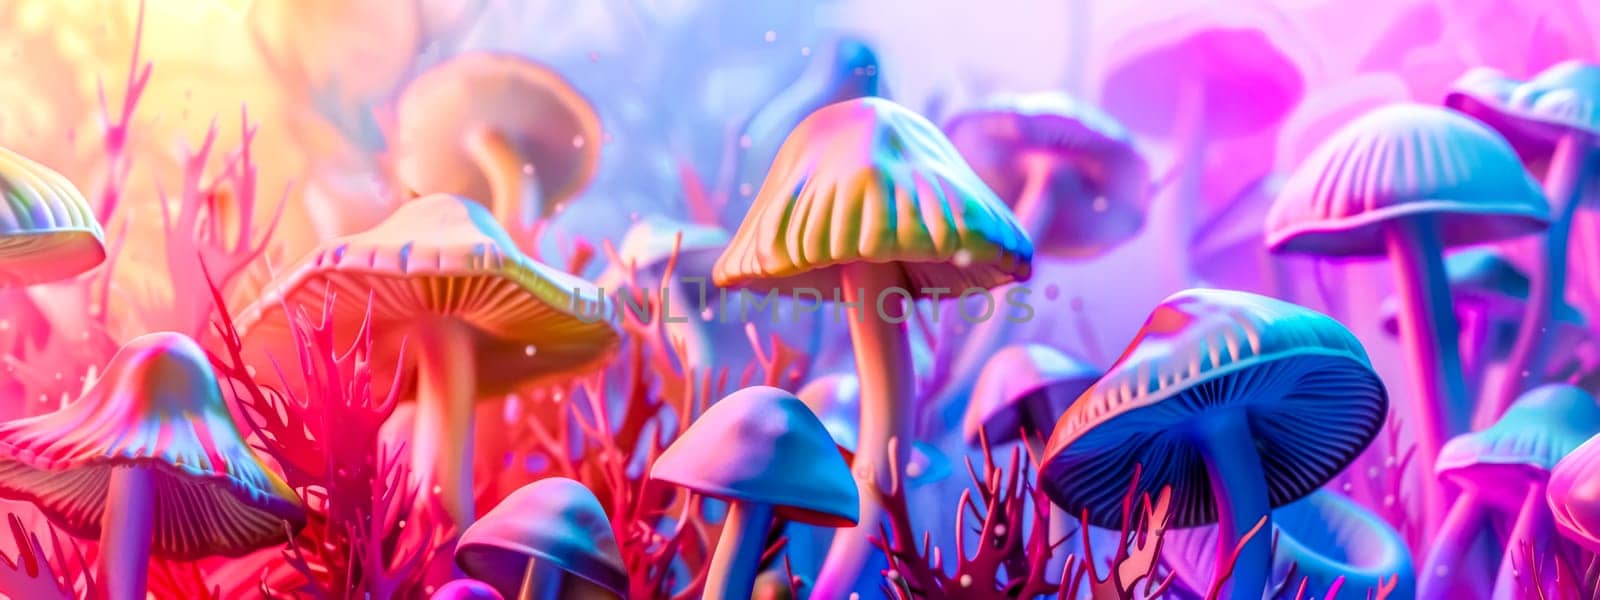 Panoramic view of colorful, luminescent mushrooms in a fantasy forest setting